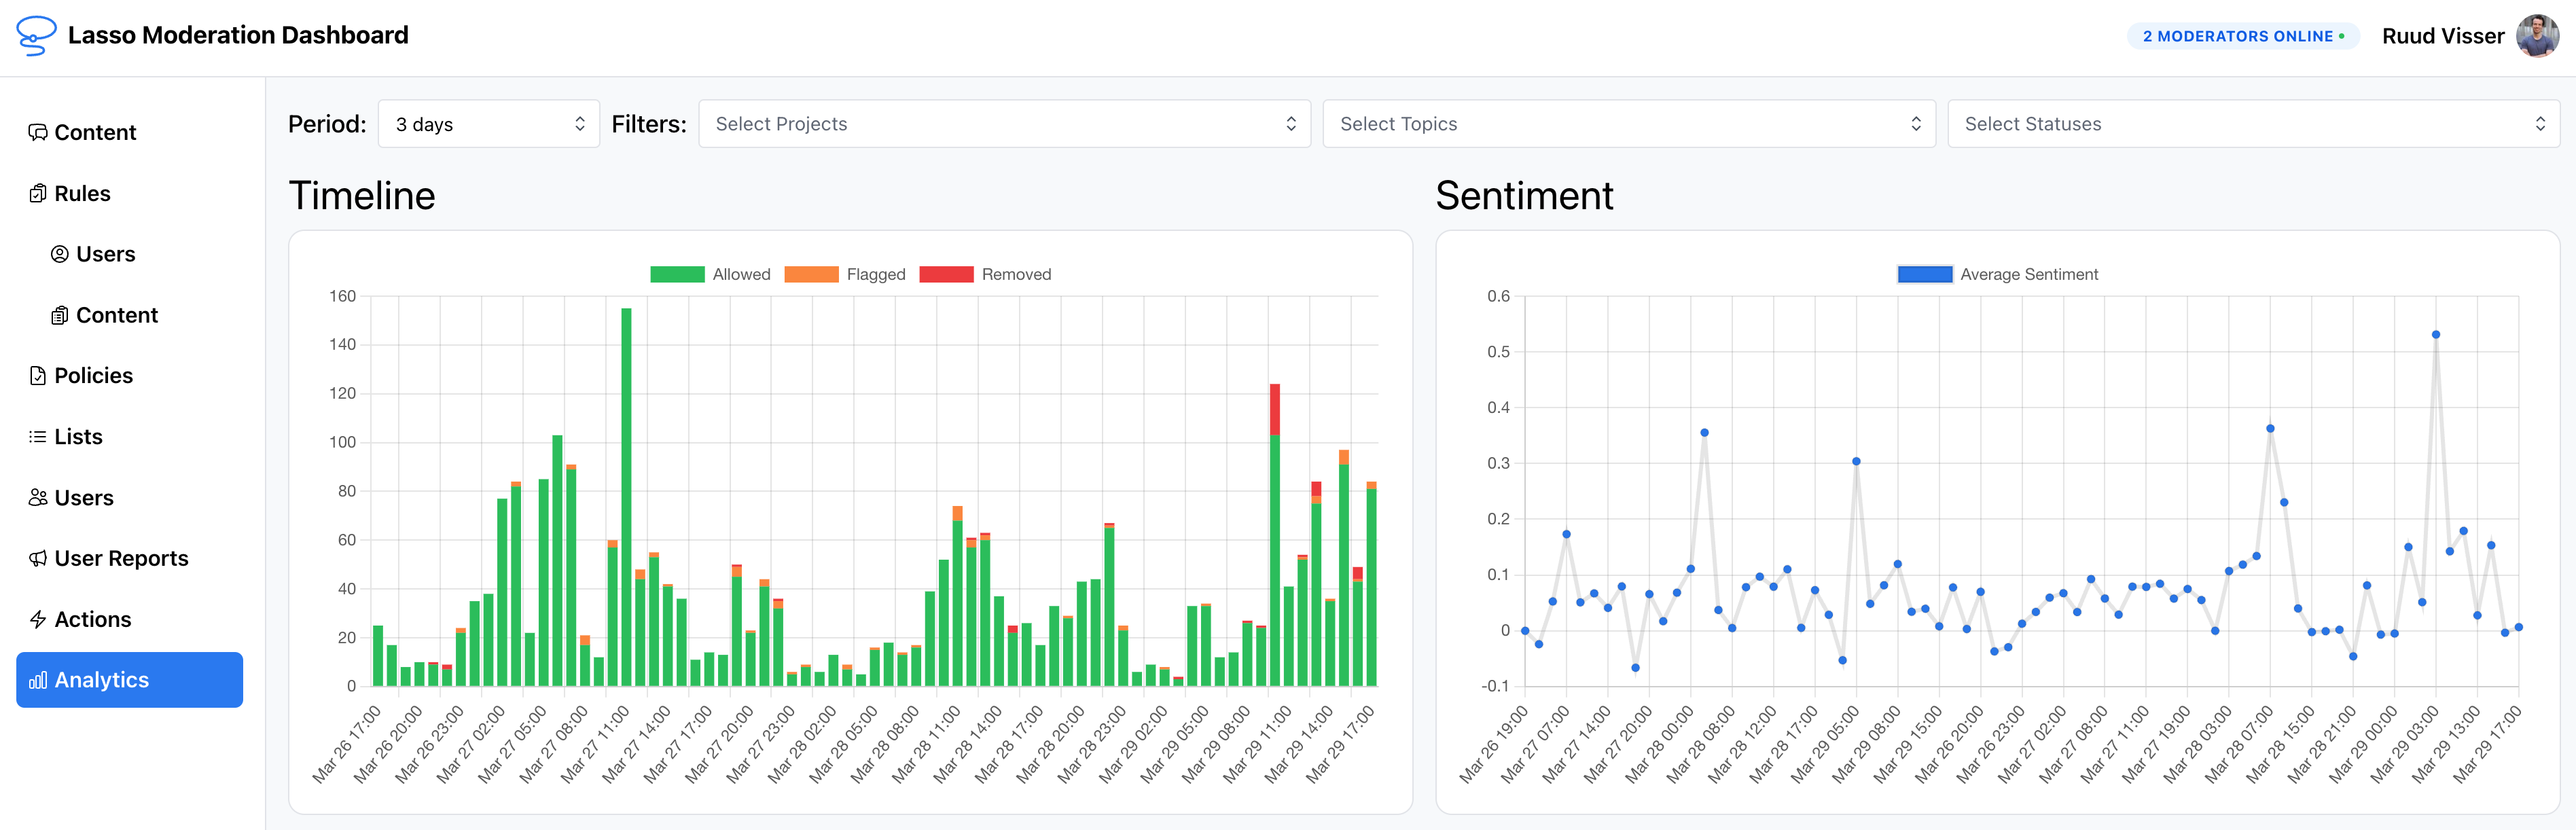 Get insights into your content. Lasso moderation automatically runs sentiment analysis, generates word clouds and shows detailed analytics over time.